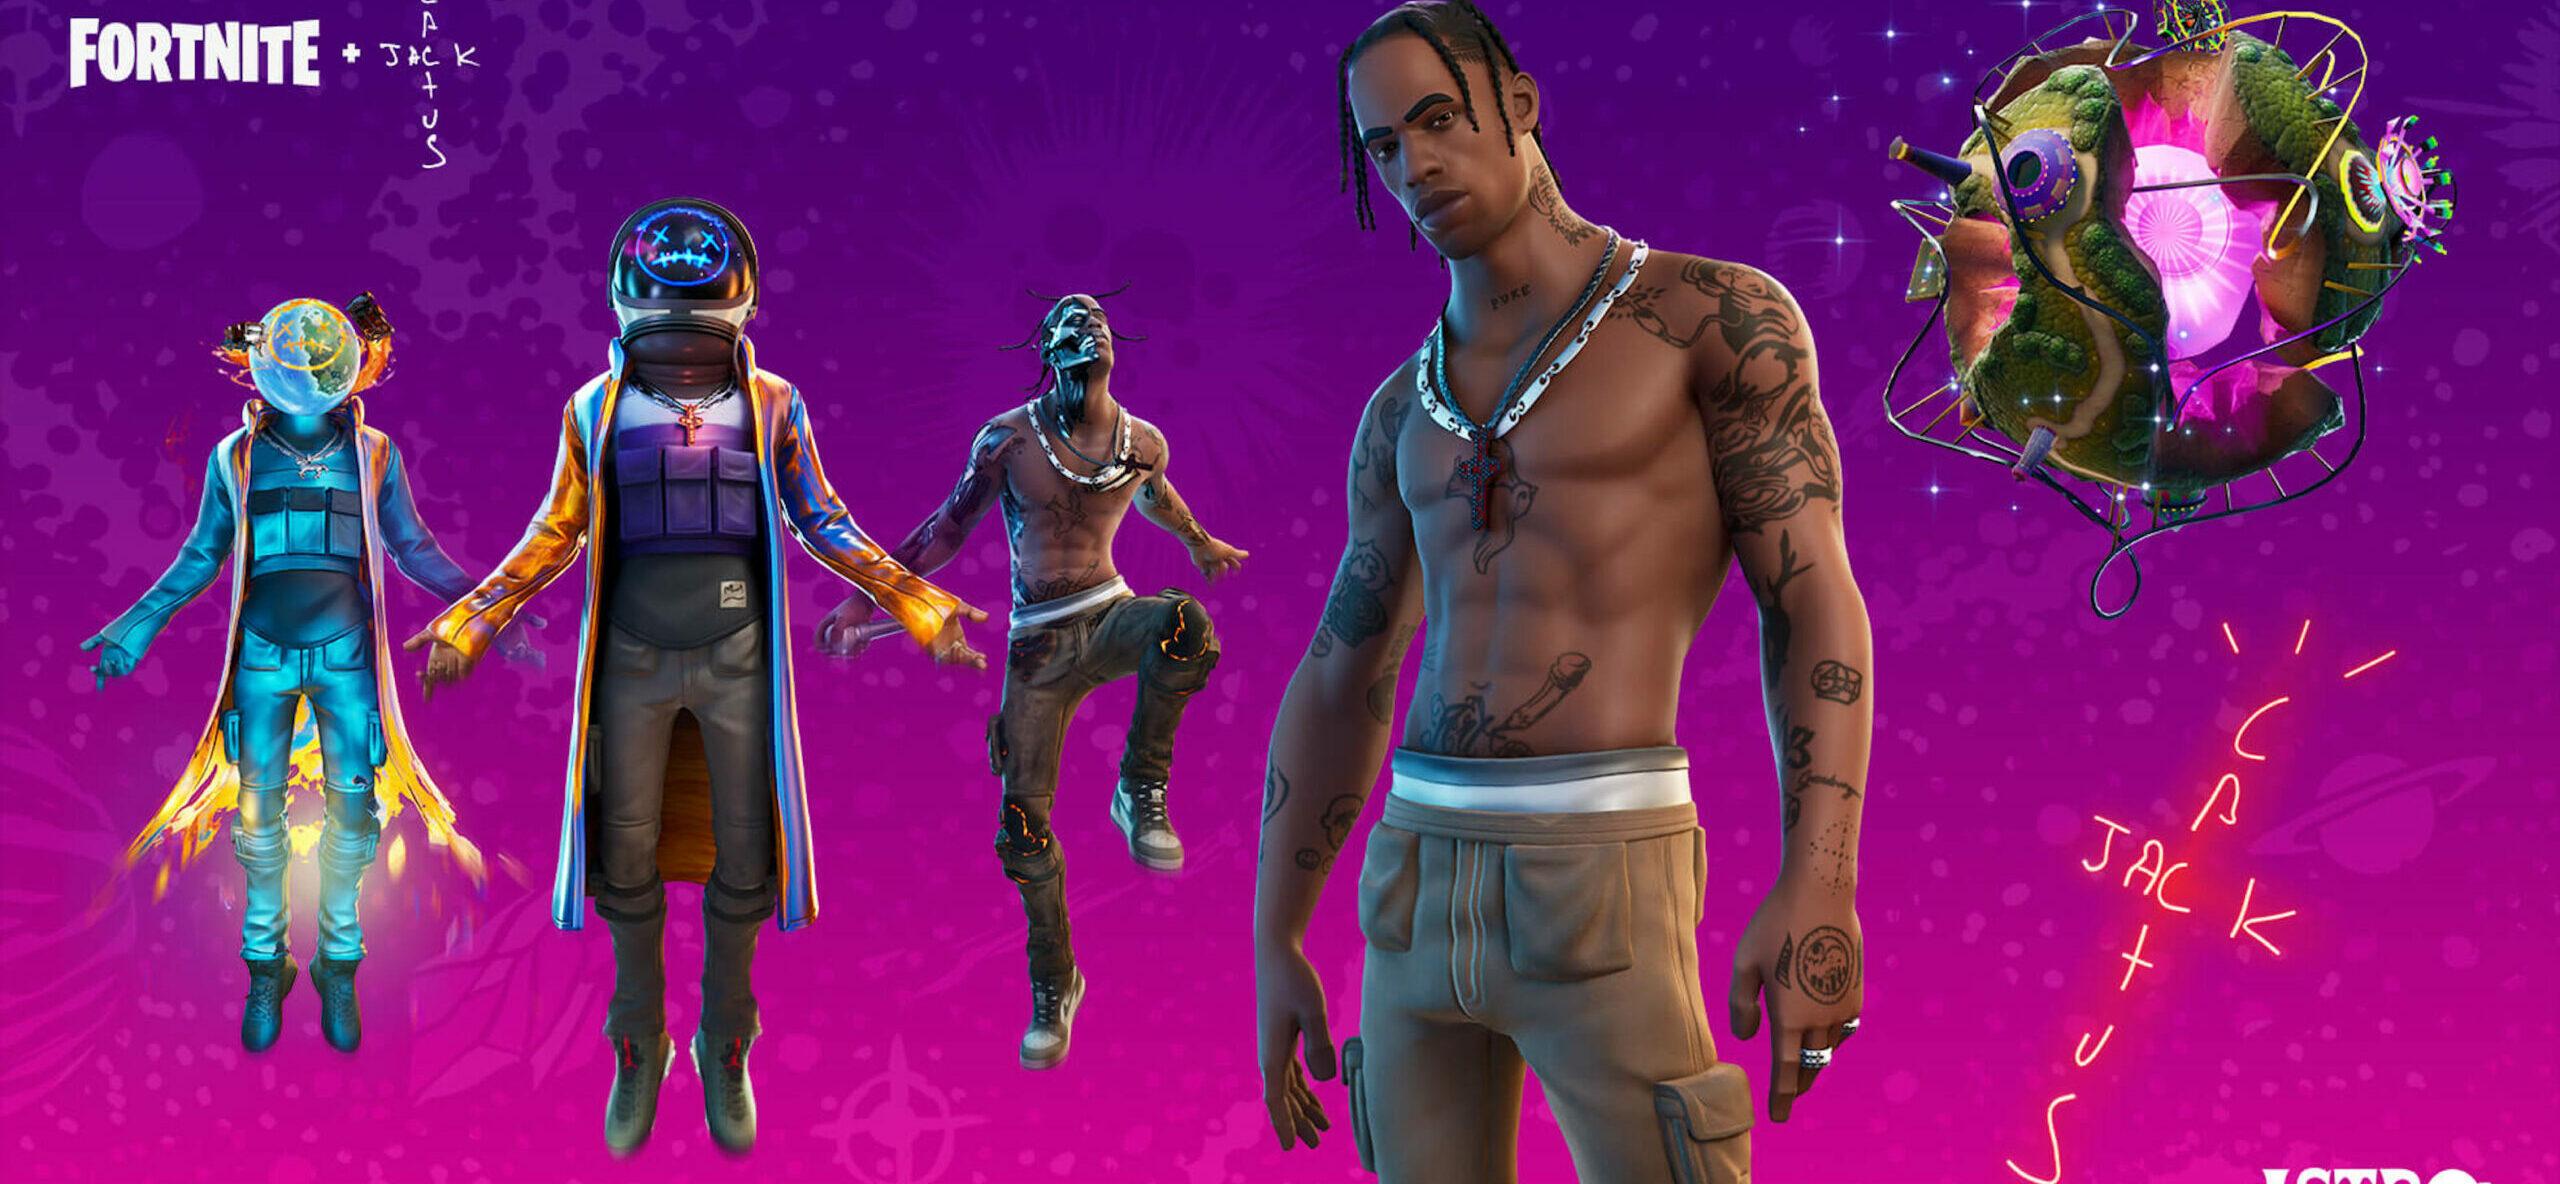 ‘Fortnite’ Removes Travis Scott From Game Following ‘Astroworld’ Tragedy